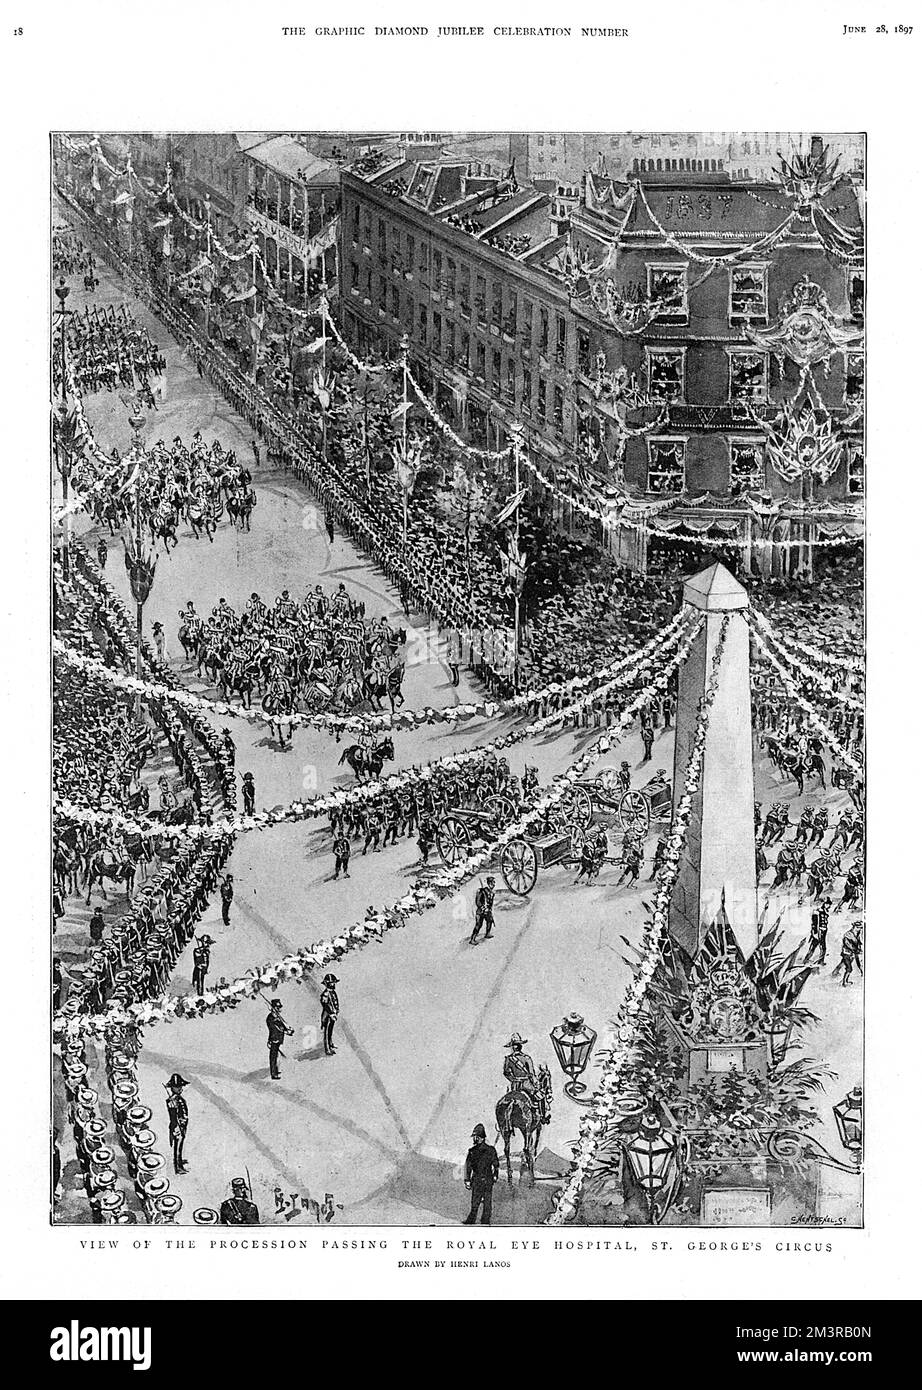 Aerial view of Queen Victoria's Jubilee Celebrations on 20 June 1897, with the procession passing the Royal Eye Hospital, St George's Circus.      Date: 20 June 1897 Stock Photo